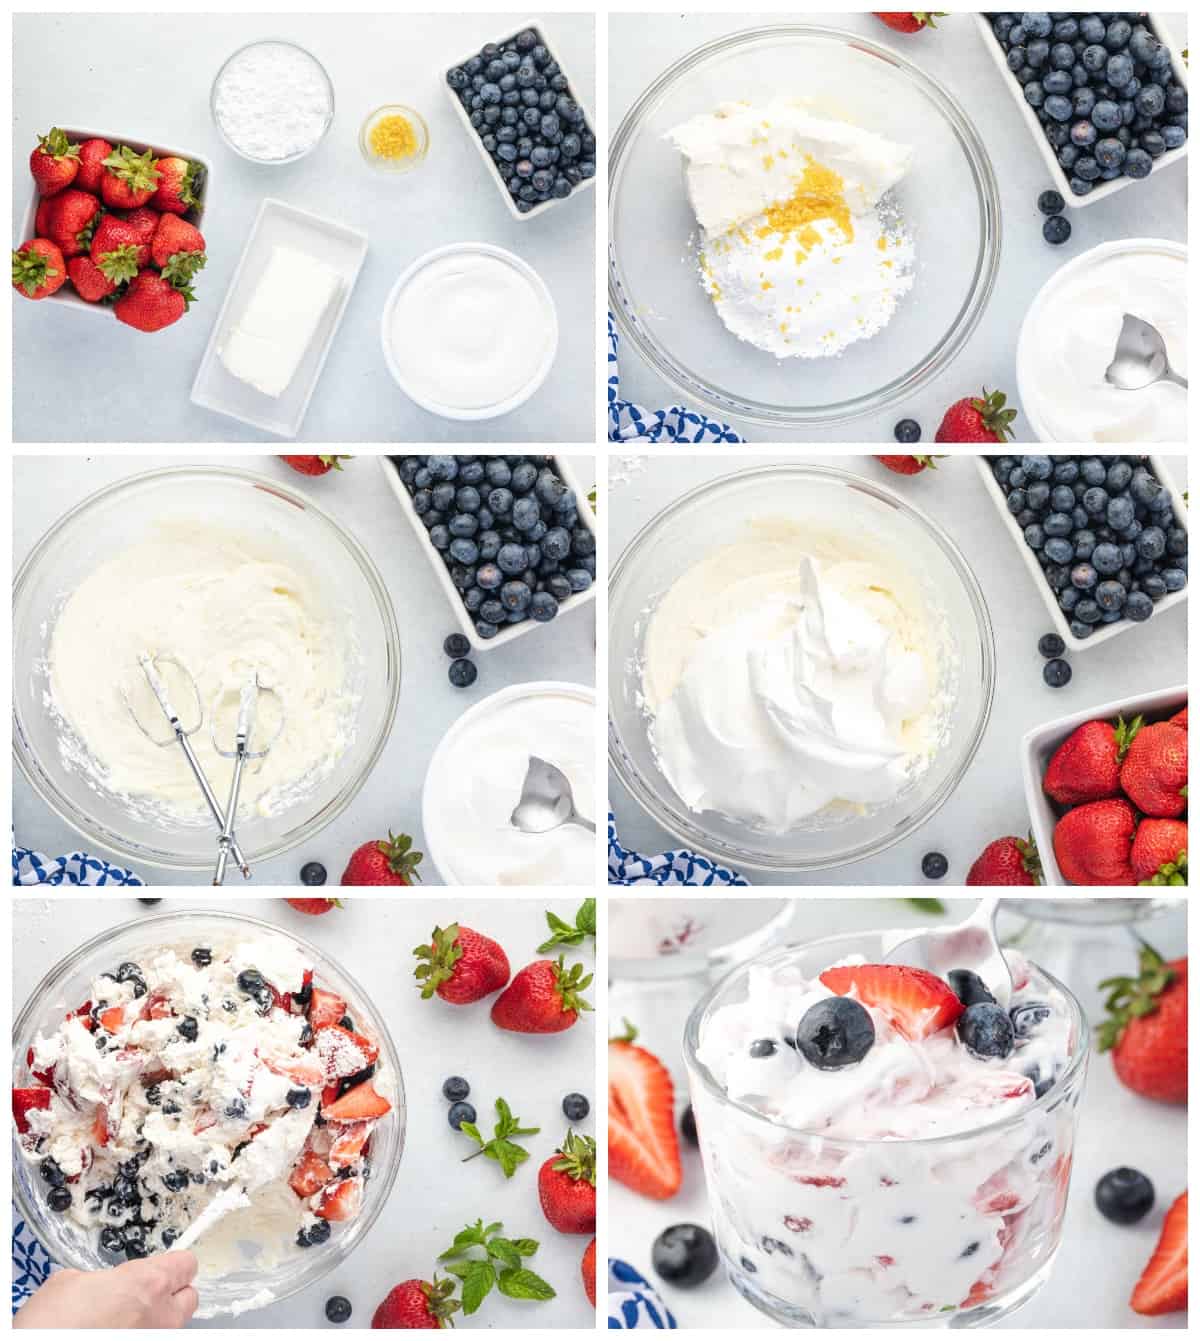 how to make berry cheesecake salad step by step photo instructions